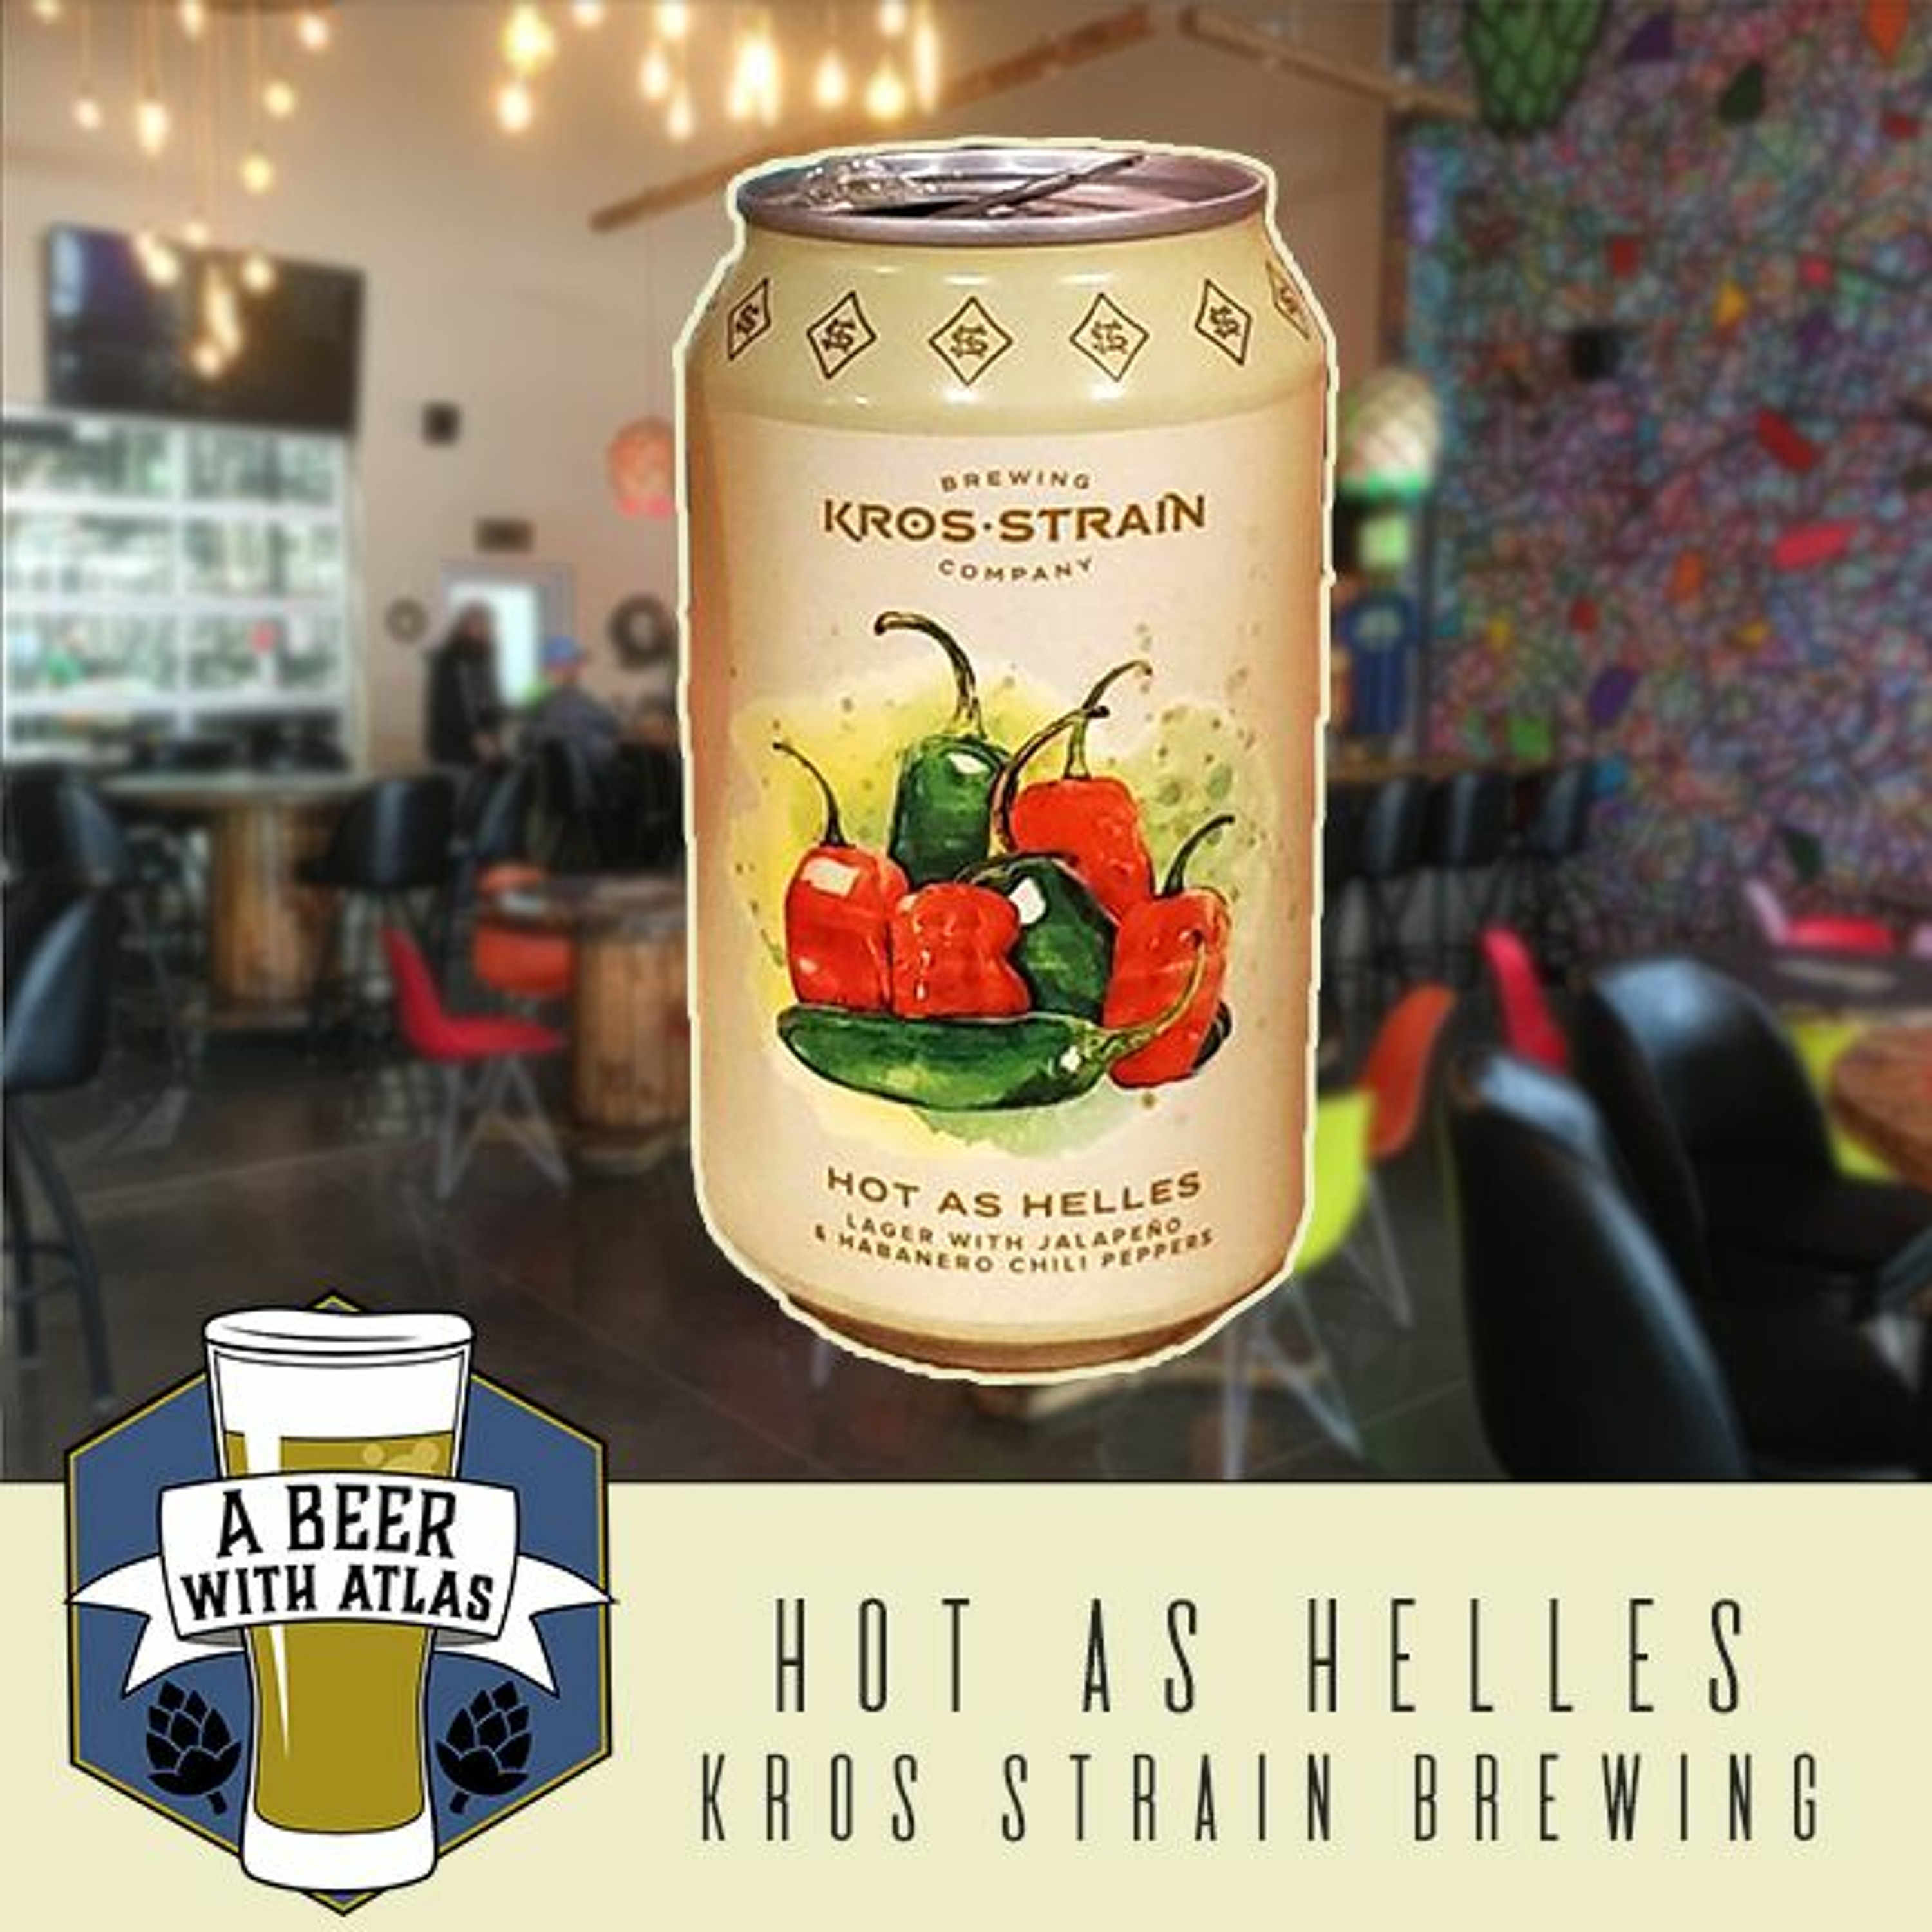 Hot As Helles from Kros Strain Brewing Company - Beer With Atlas 108